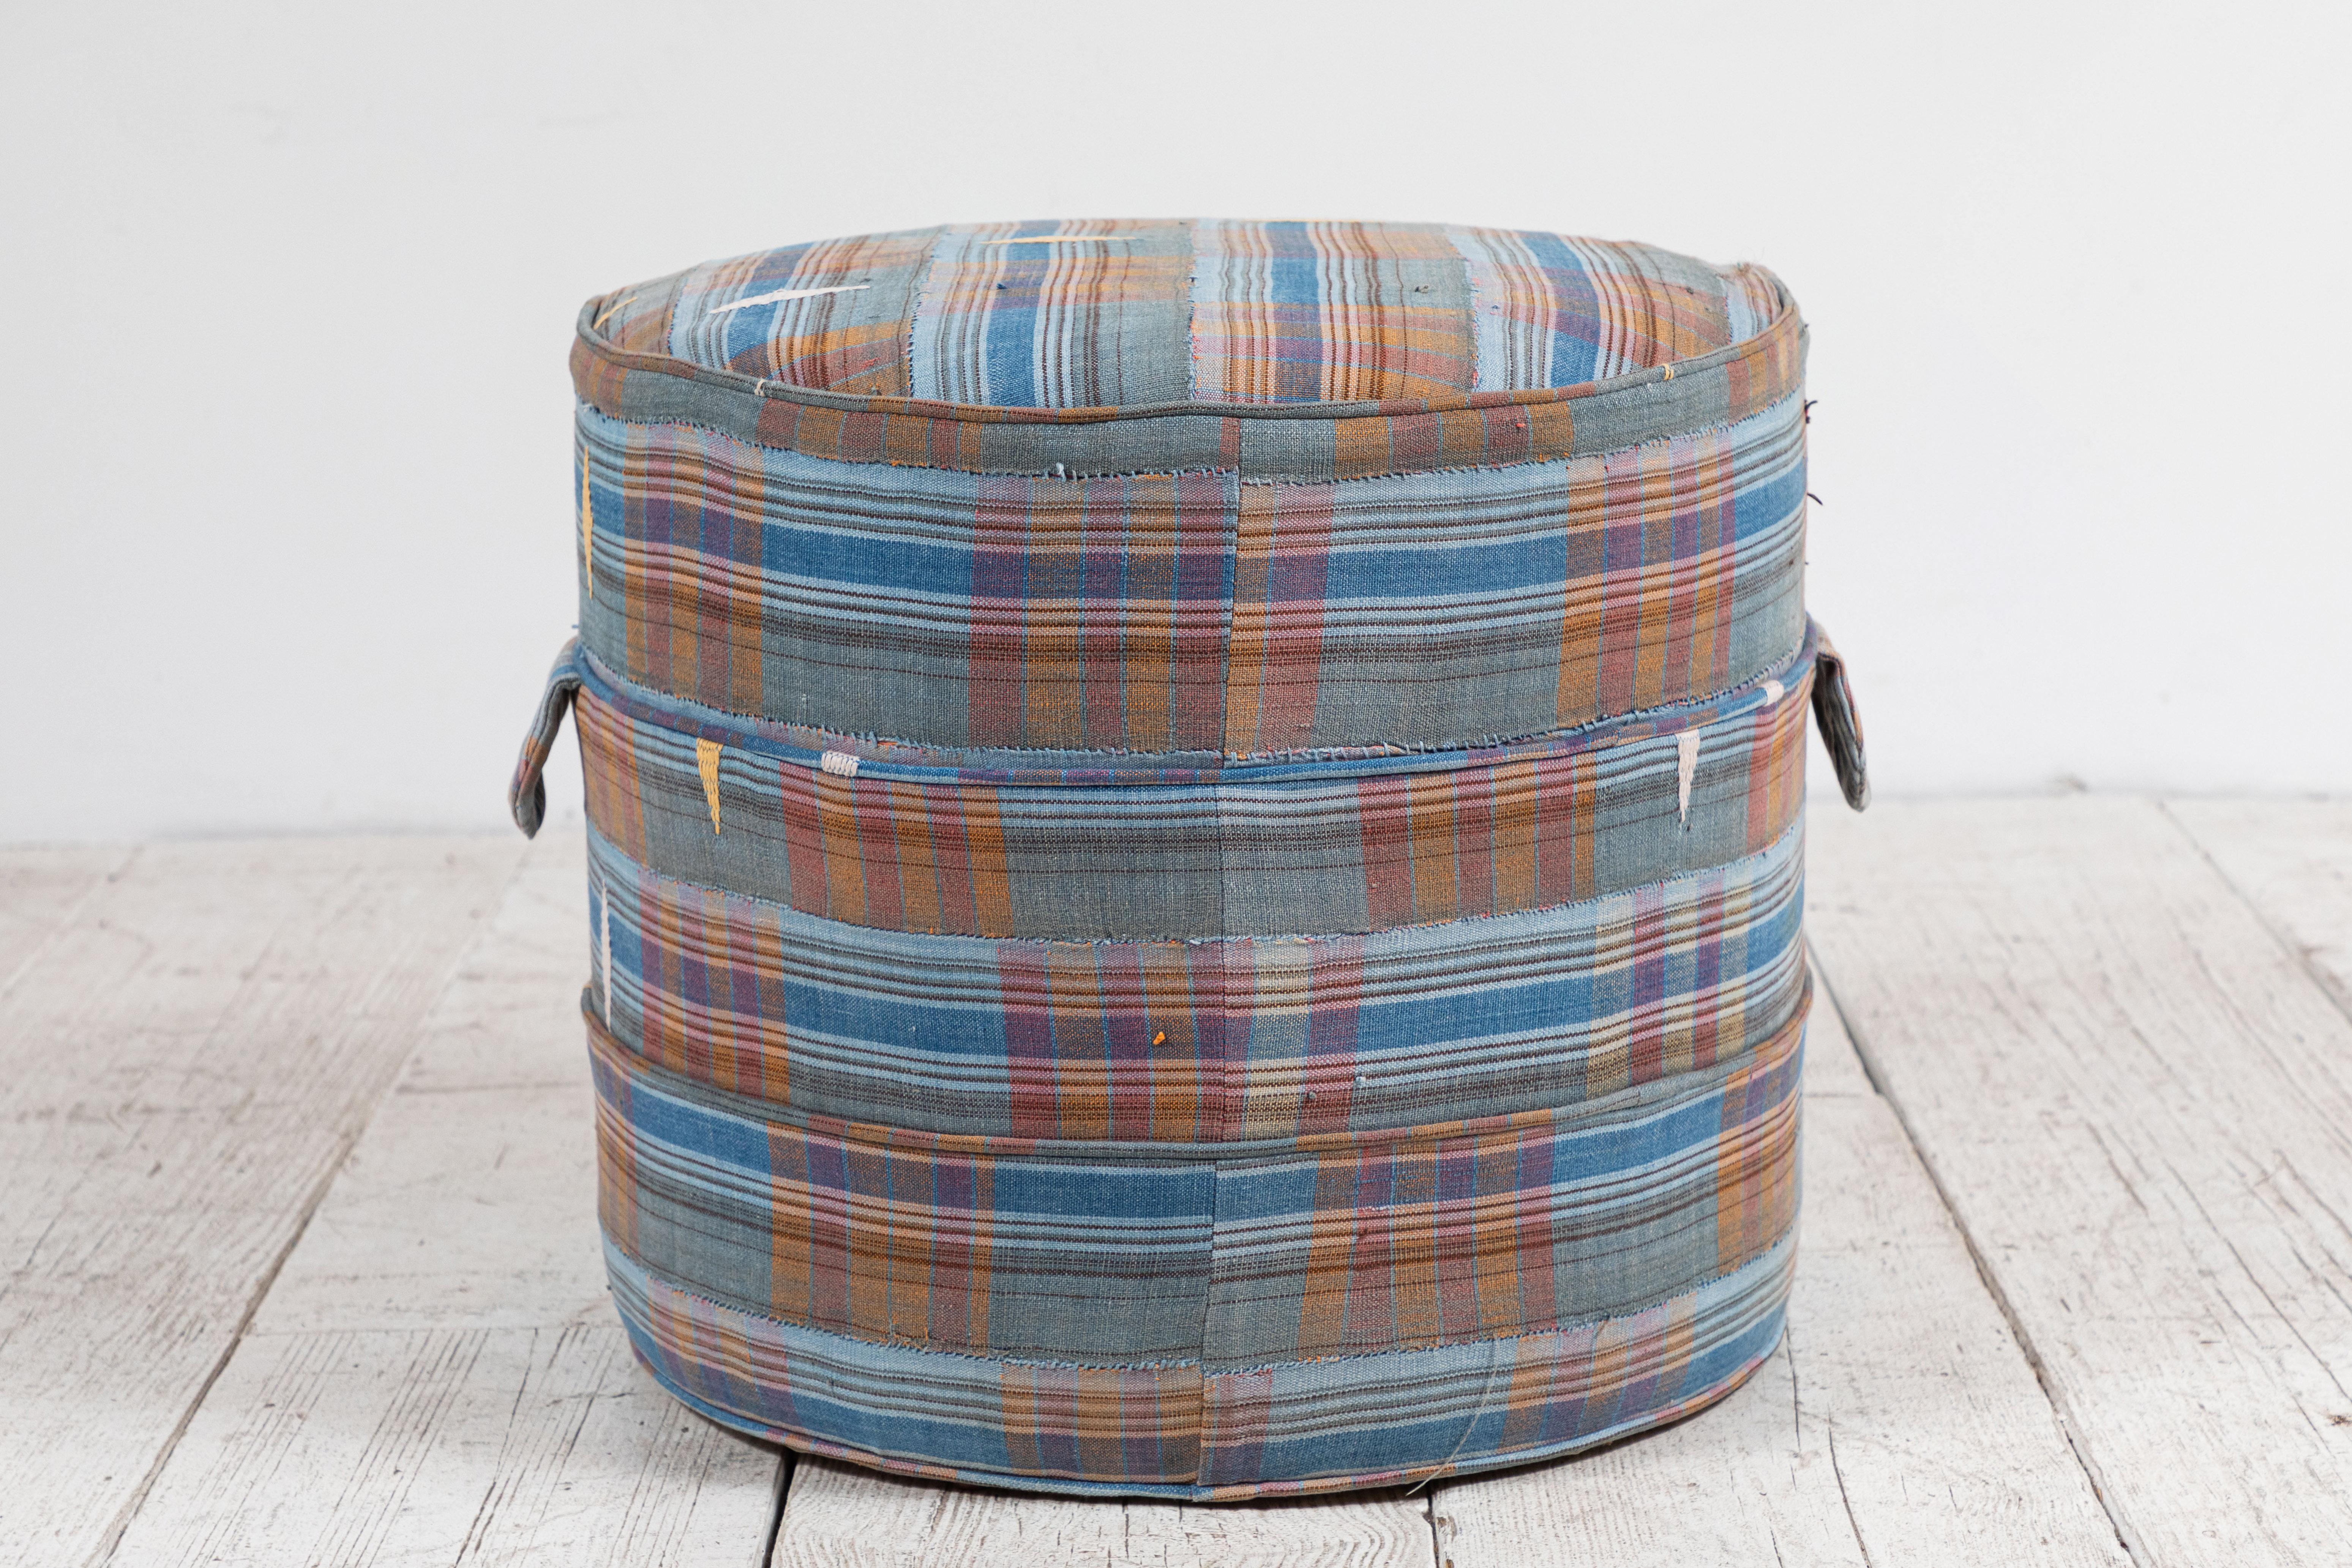 Solid wood frame and upholstered hassock with two ring piping and double handle details offers versatility in accent seating. Please enquire regarding custom sizes.

This specific hassock is upholstered in one of a kind African fabric.